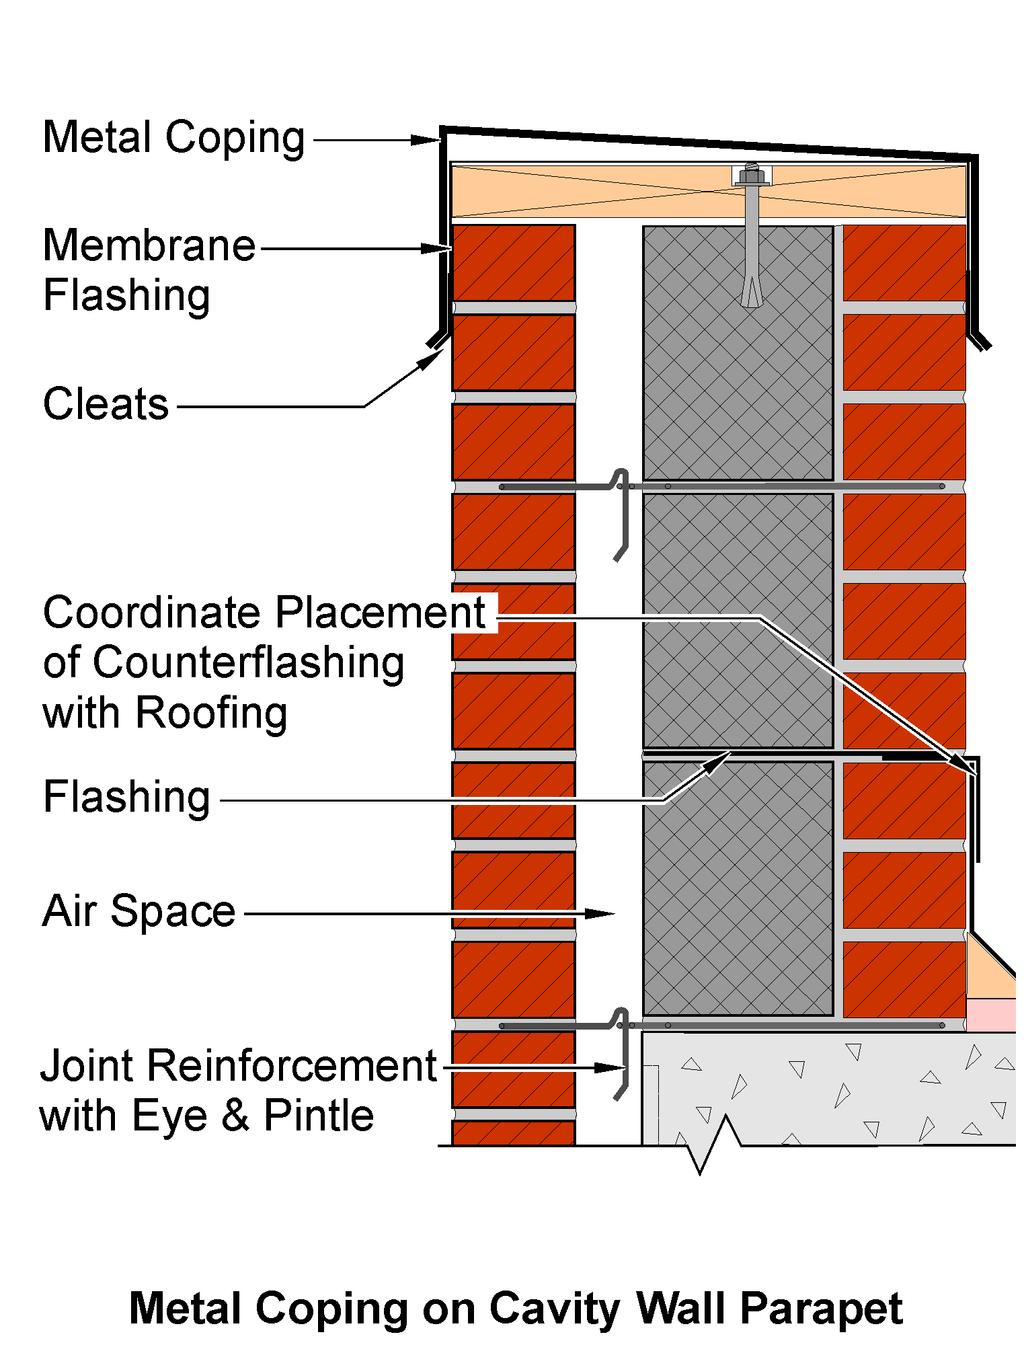 The tops of all walls and parapets must have a cap or coping, with flashing recommended directly beneath the coping.